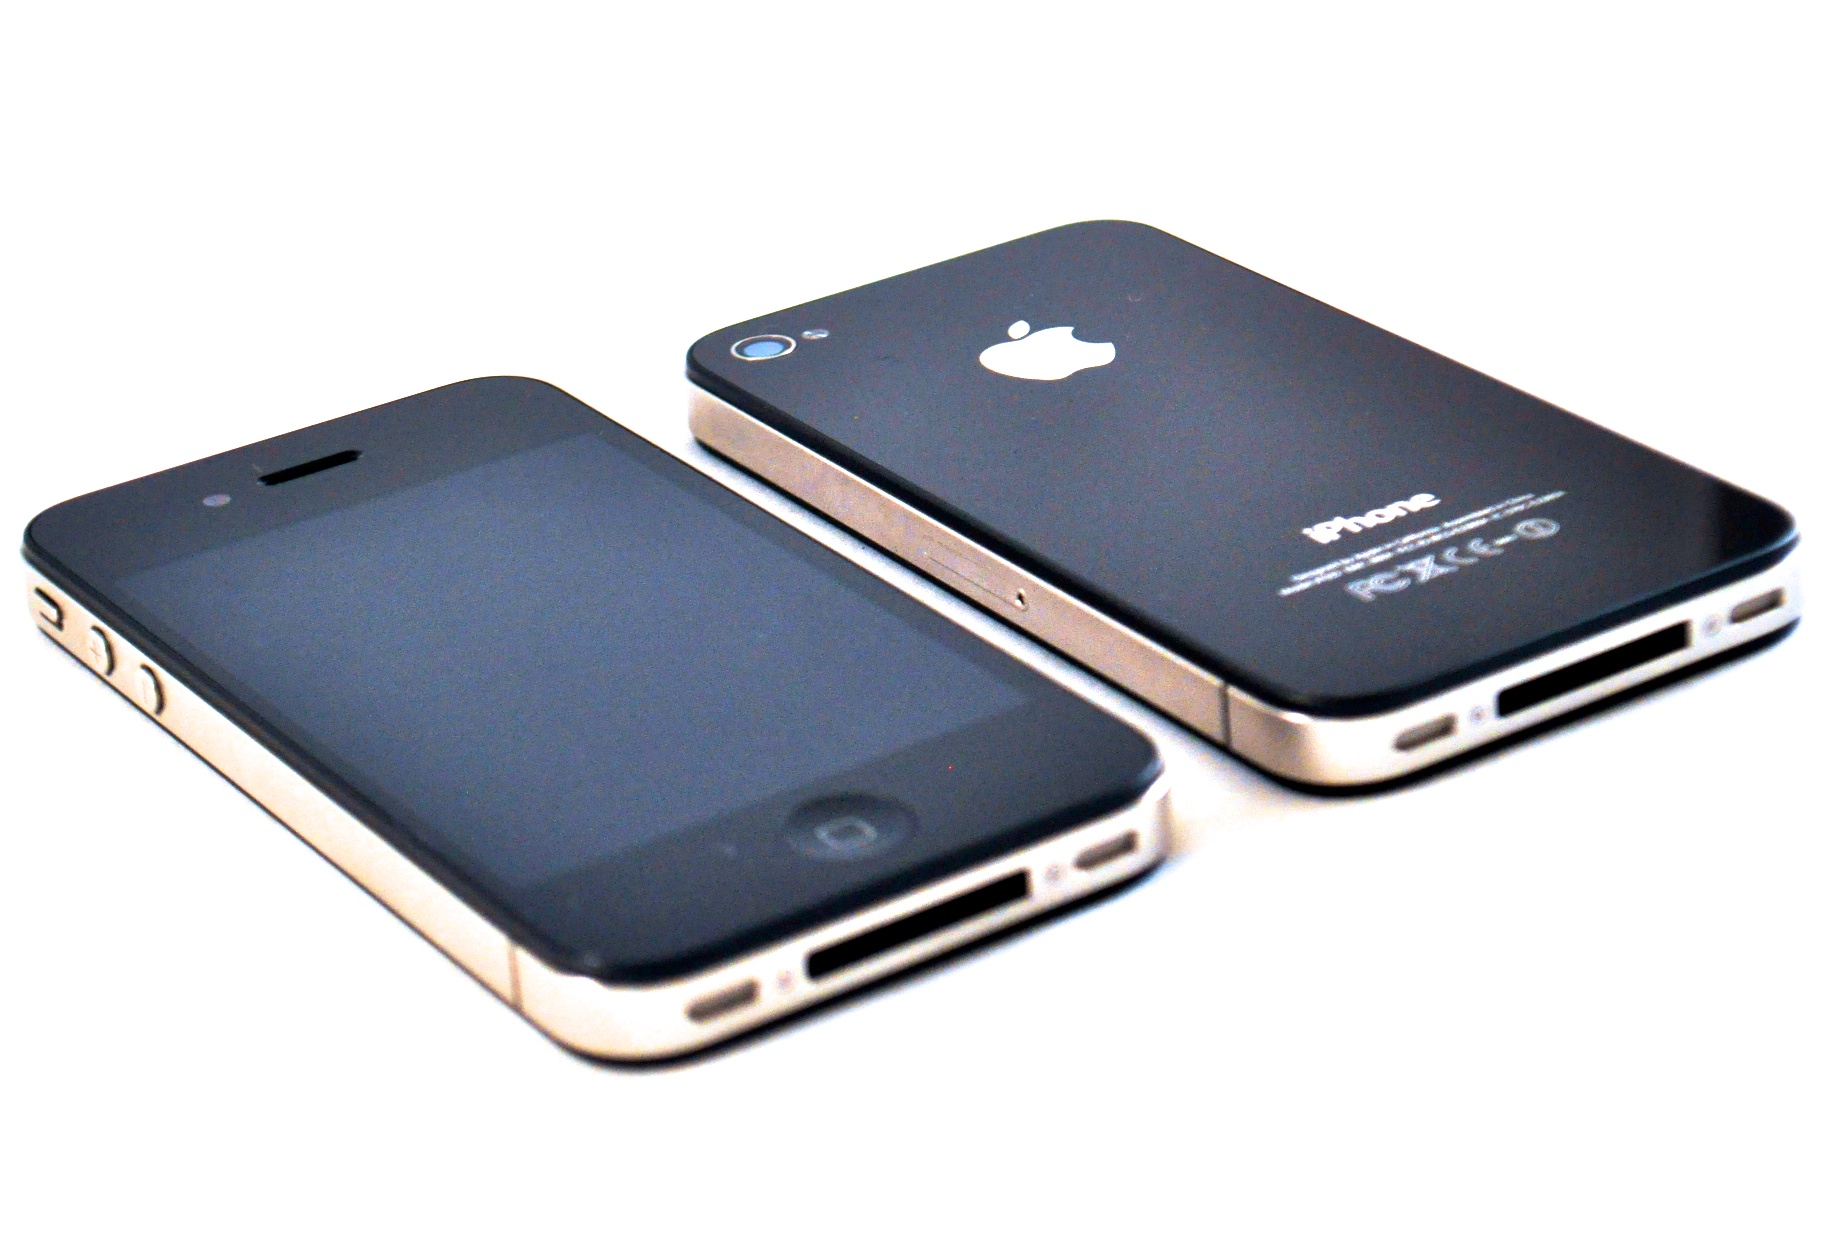 How Can I Hacktivate My Iphone 4 Iphone 3gs Or Iphone 3g Syncios Blog